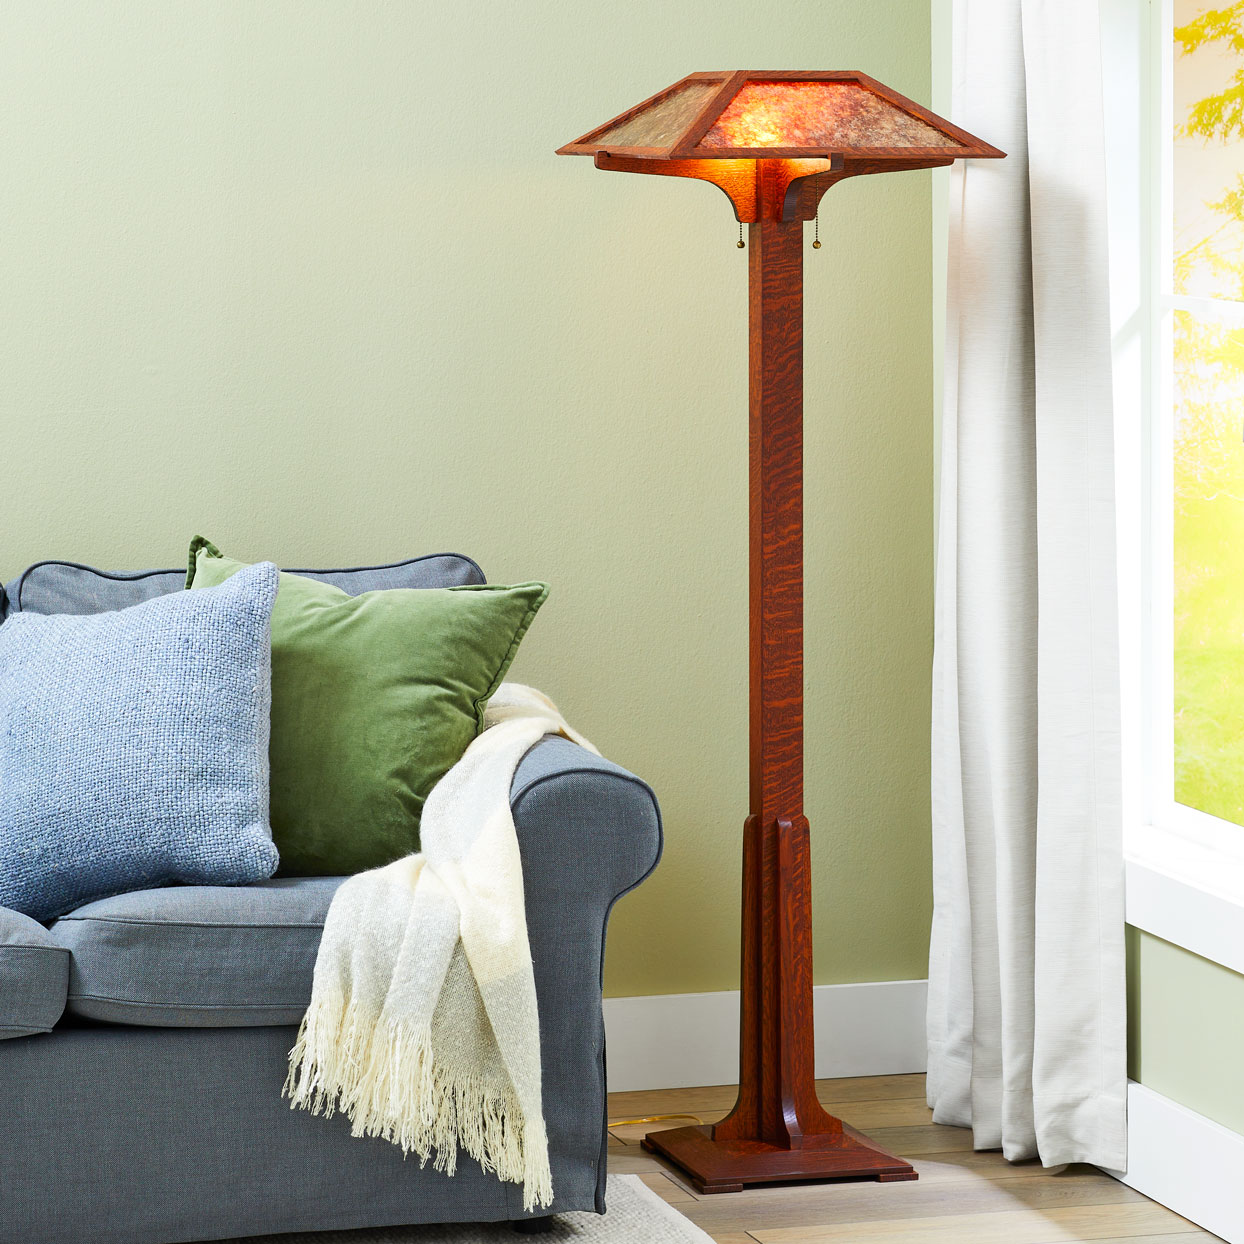 Mission style tall lamp standing between couch and windwo